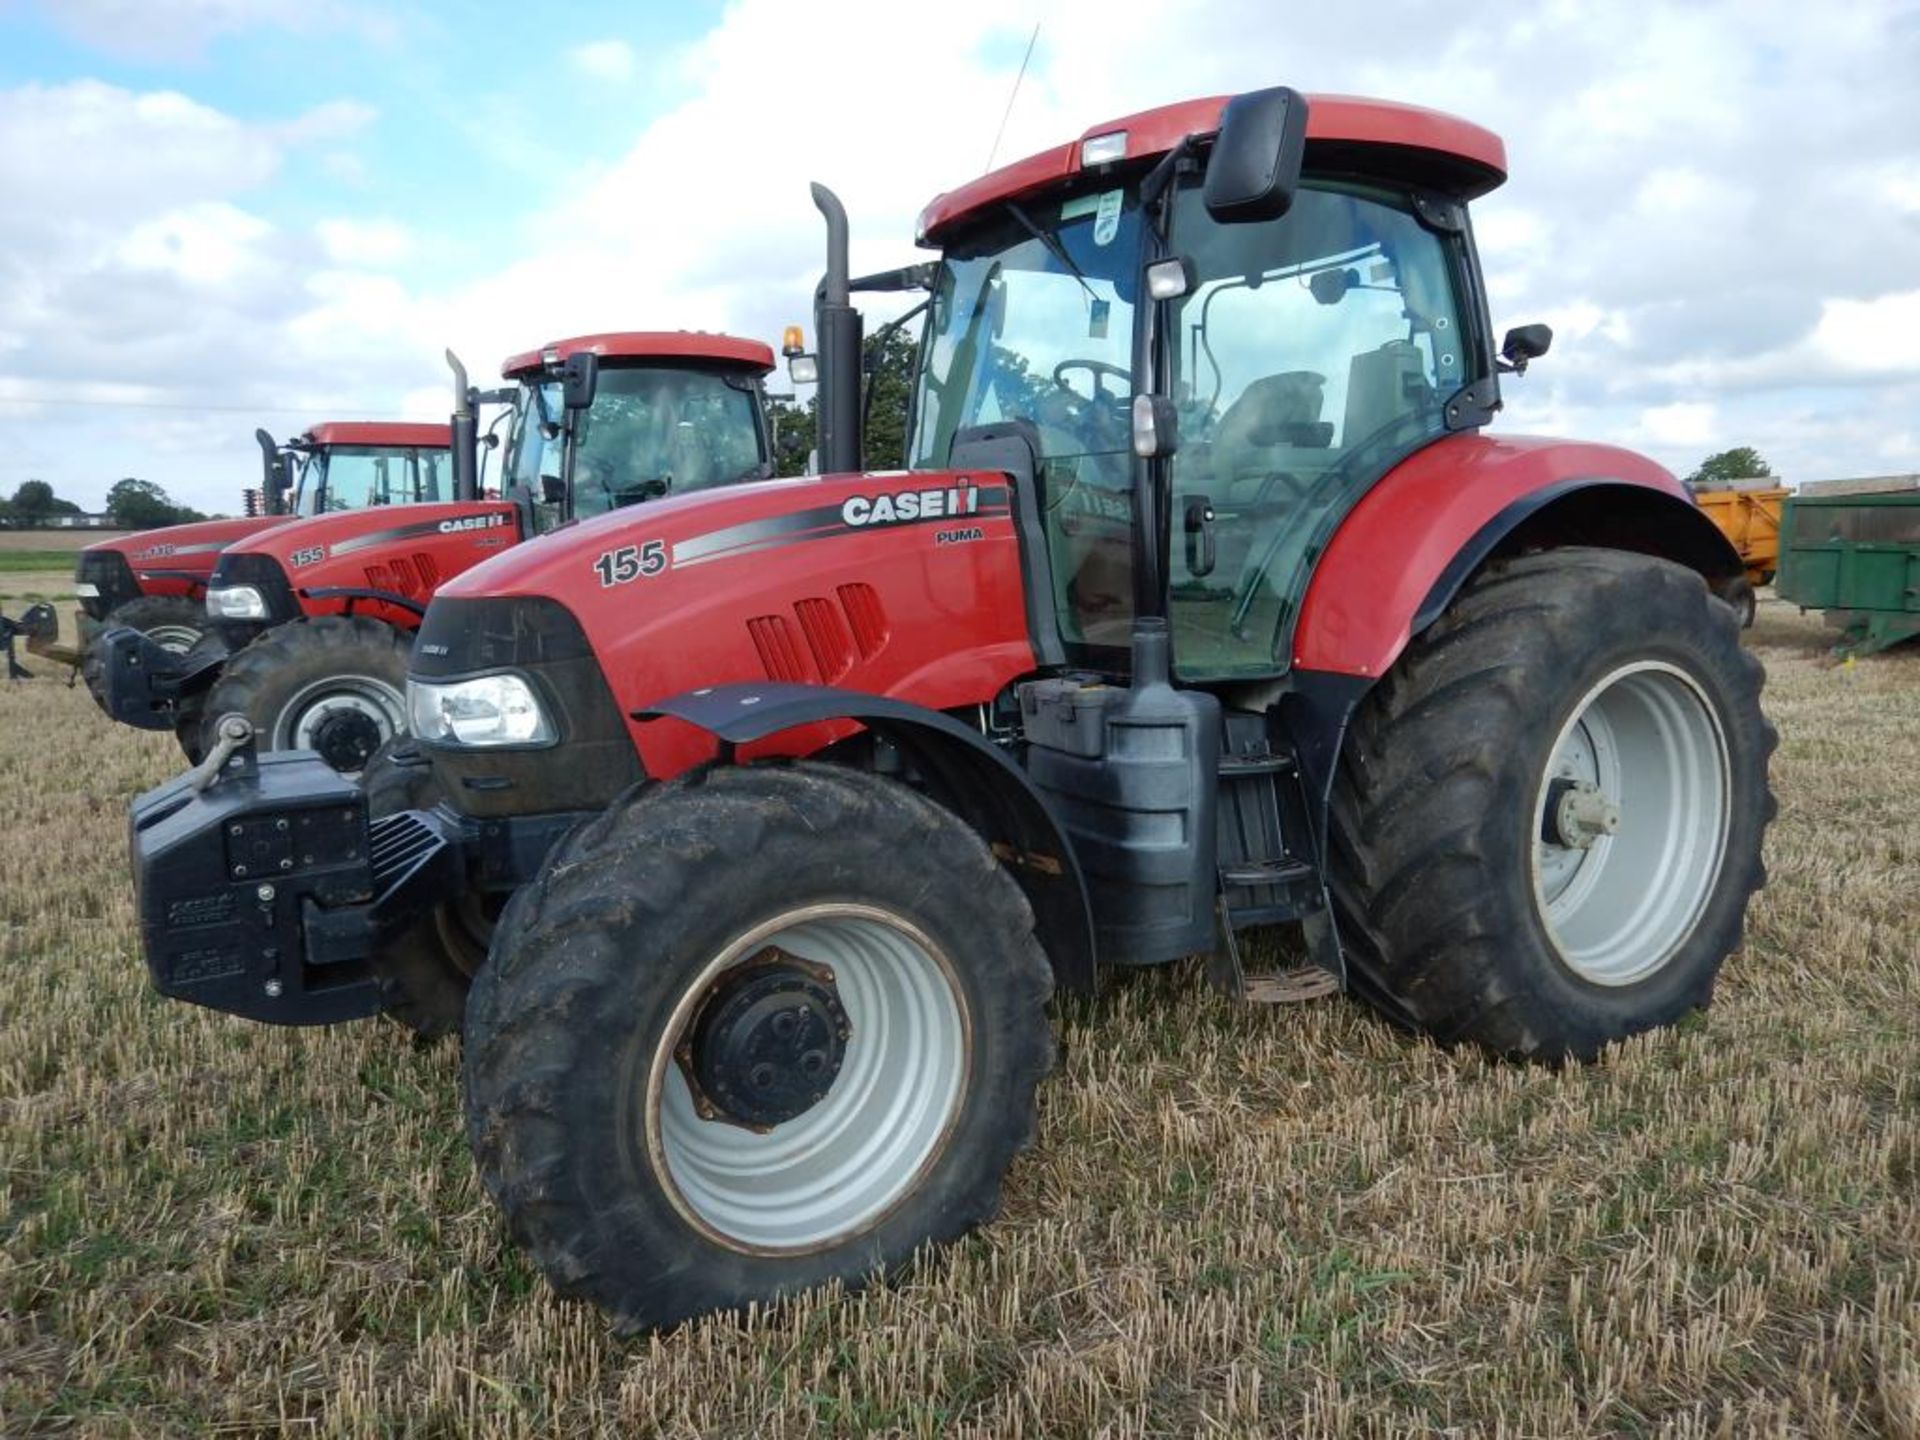 2009 CASE IH 155 Puma 50kph 4wd TRACTOR Fitted with front weight, cab and front suspension, air